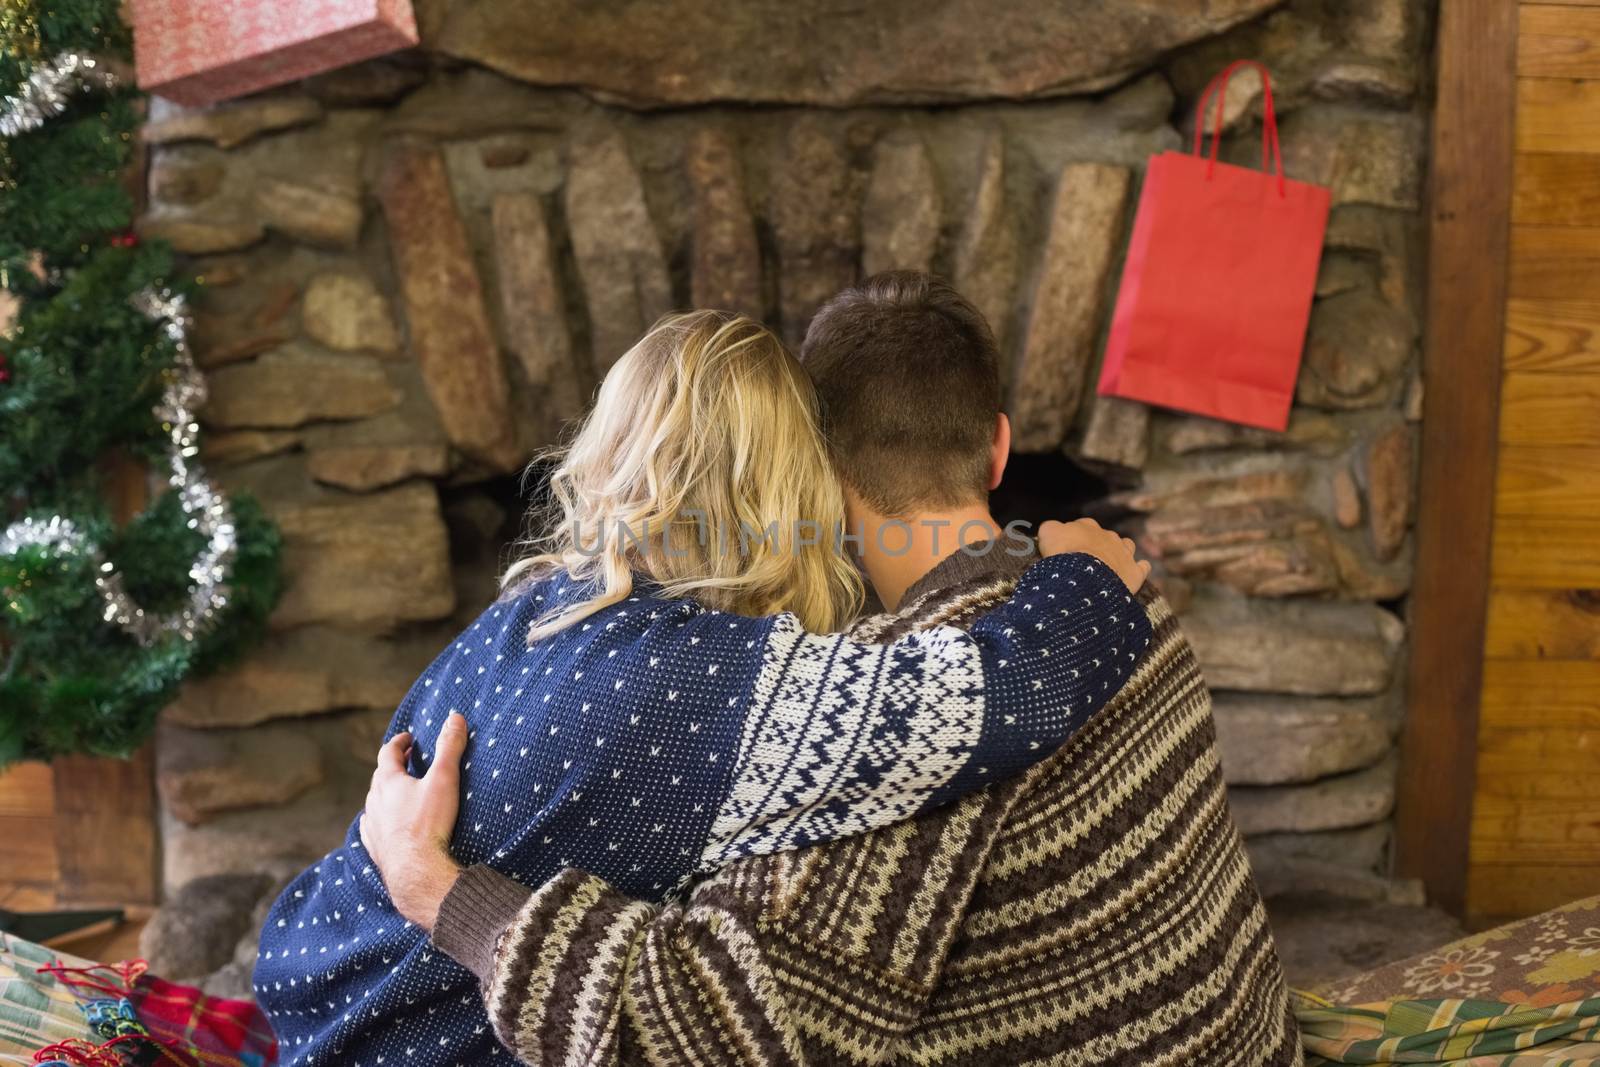 Rear view of a romantic young couple embracing in front of fireplace